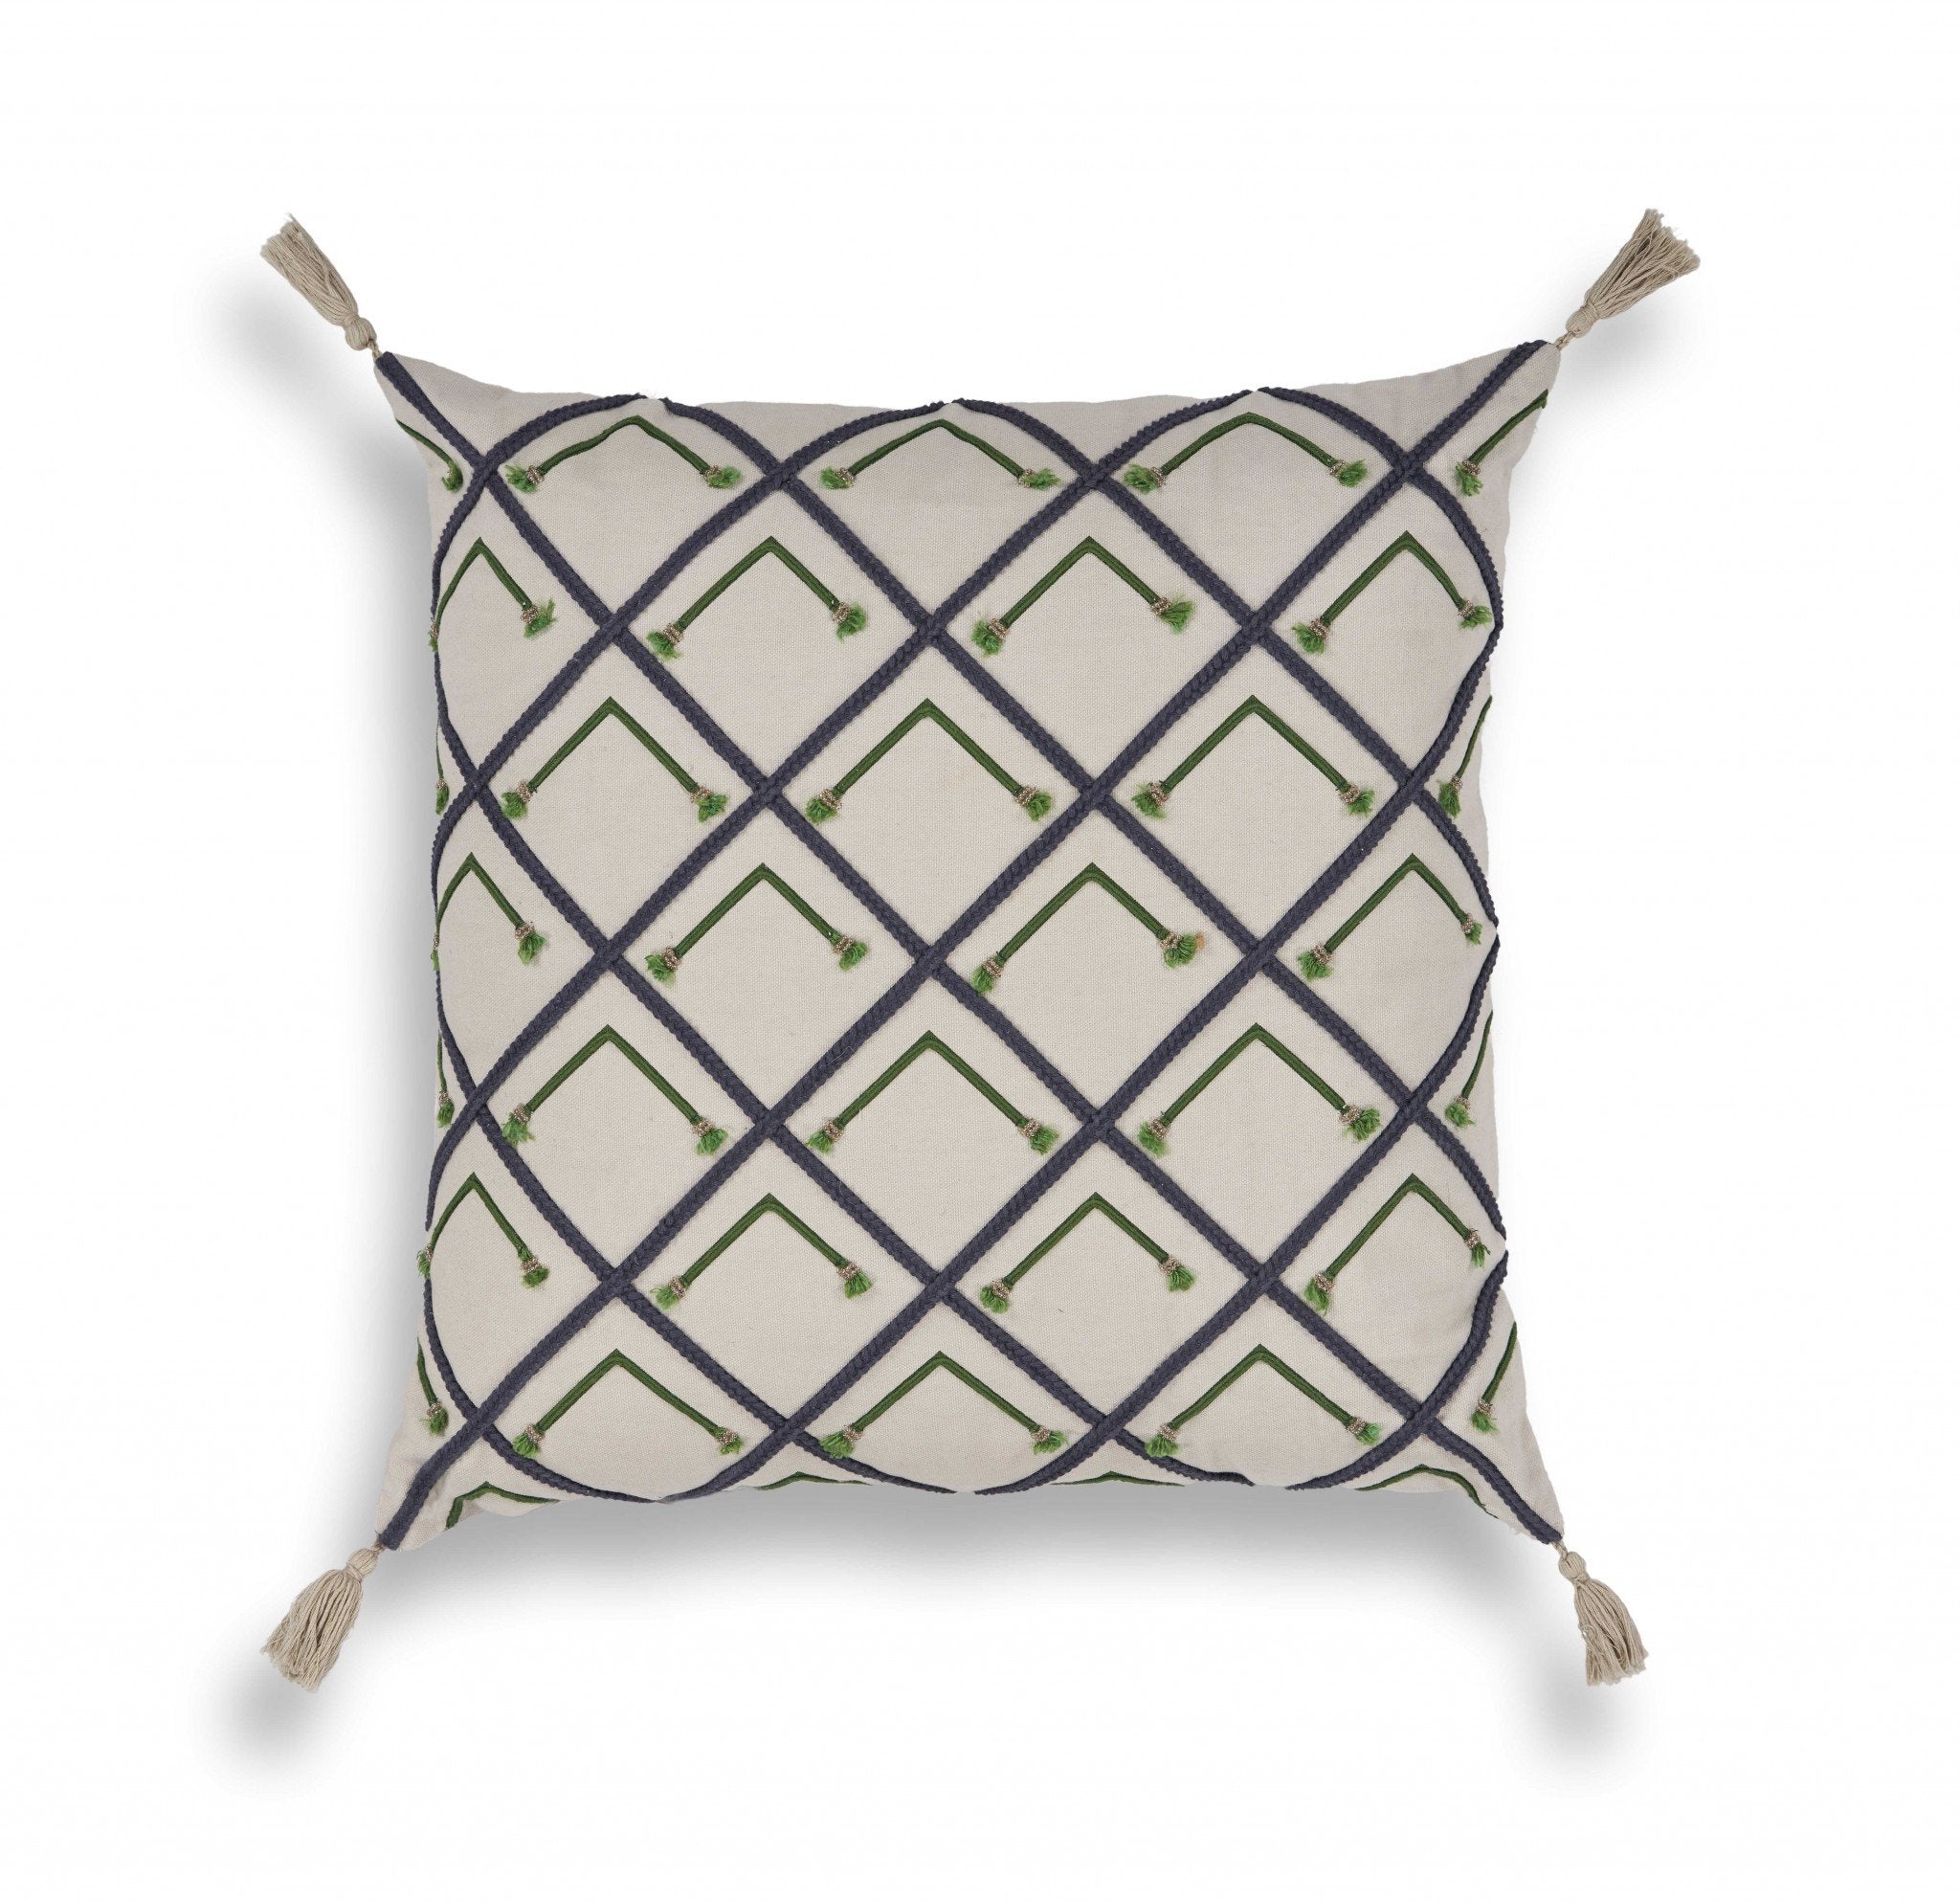 Elegant square Blue and Green Beaded Accent Pillow